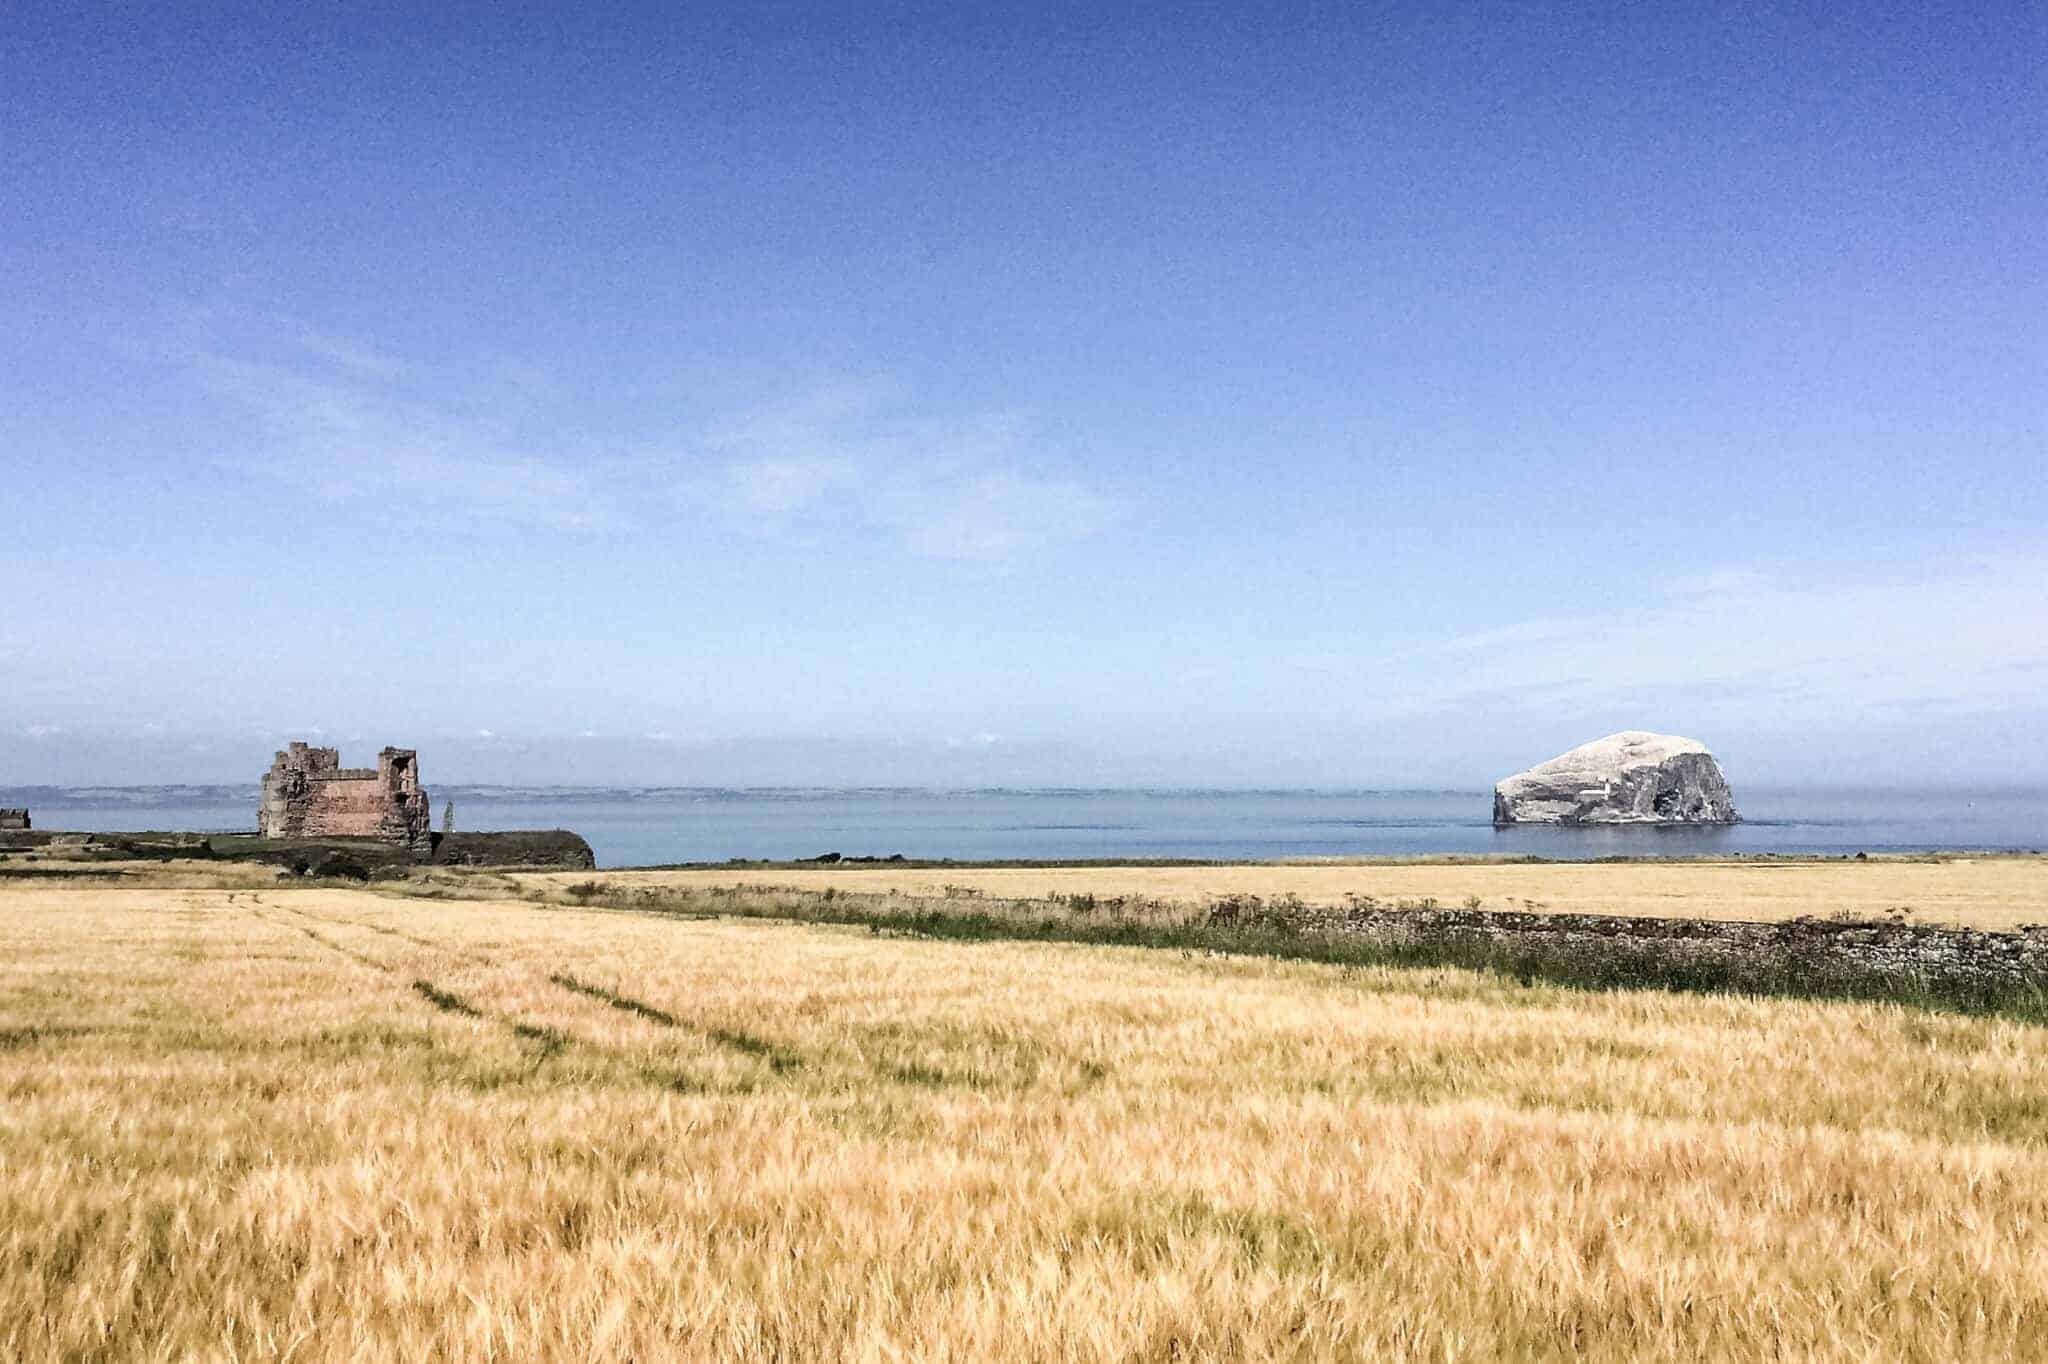 How to visit: Tantallon Castle and Bass Rock